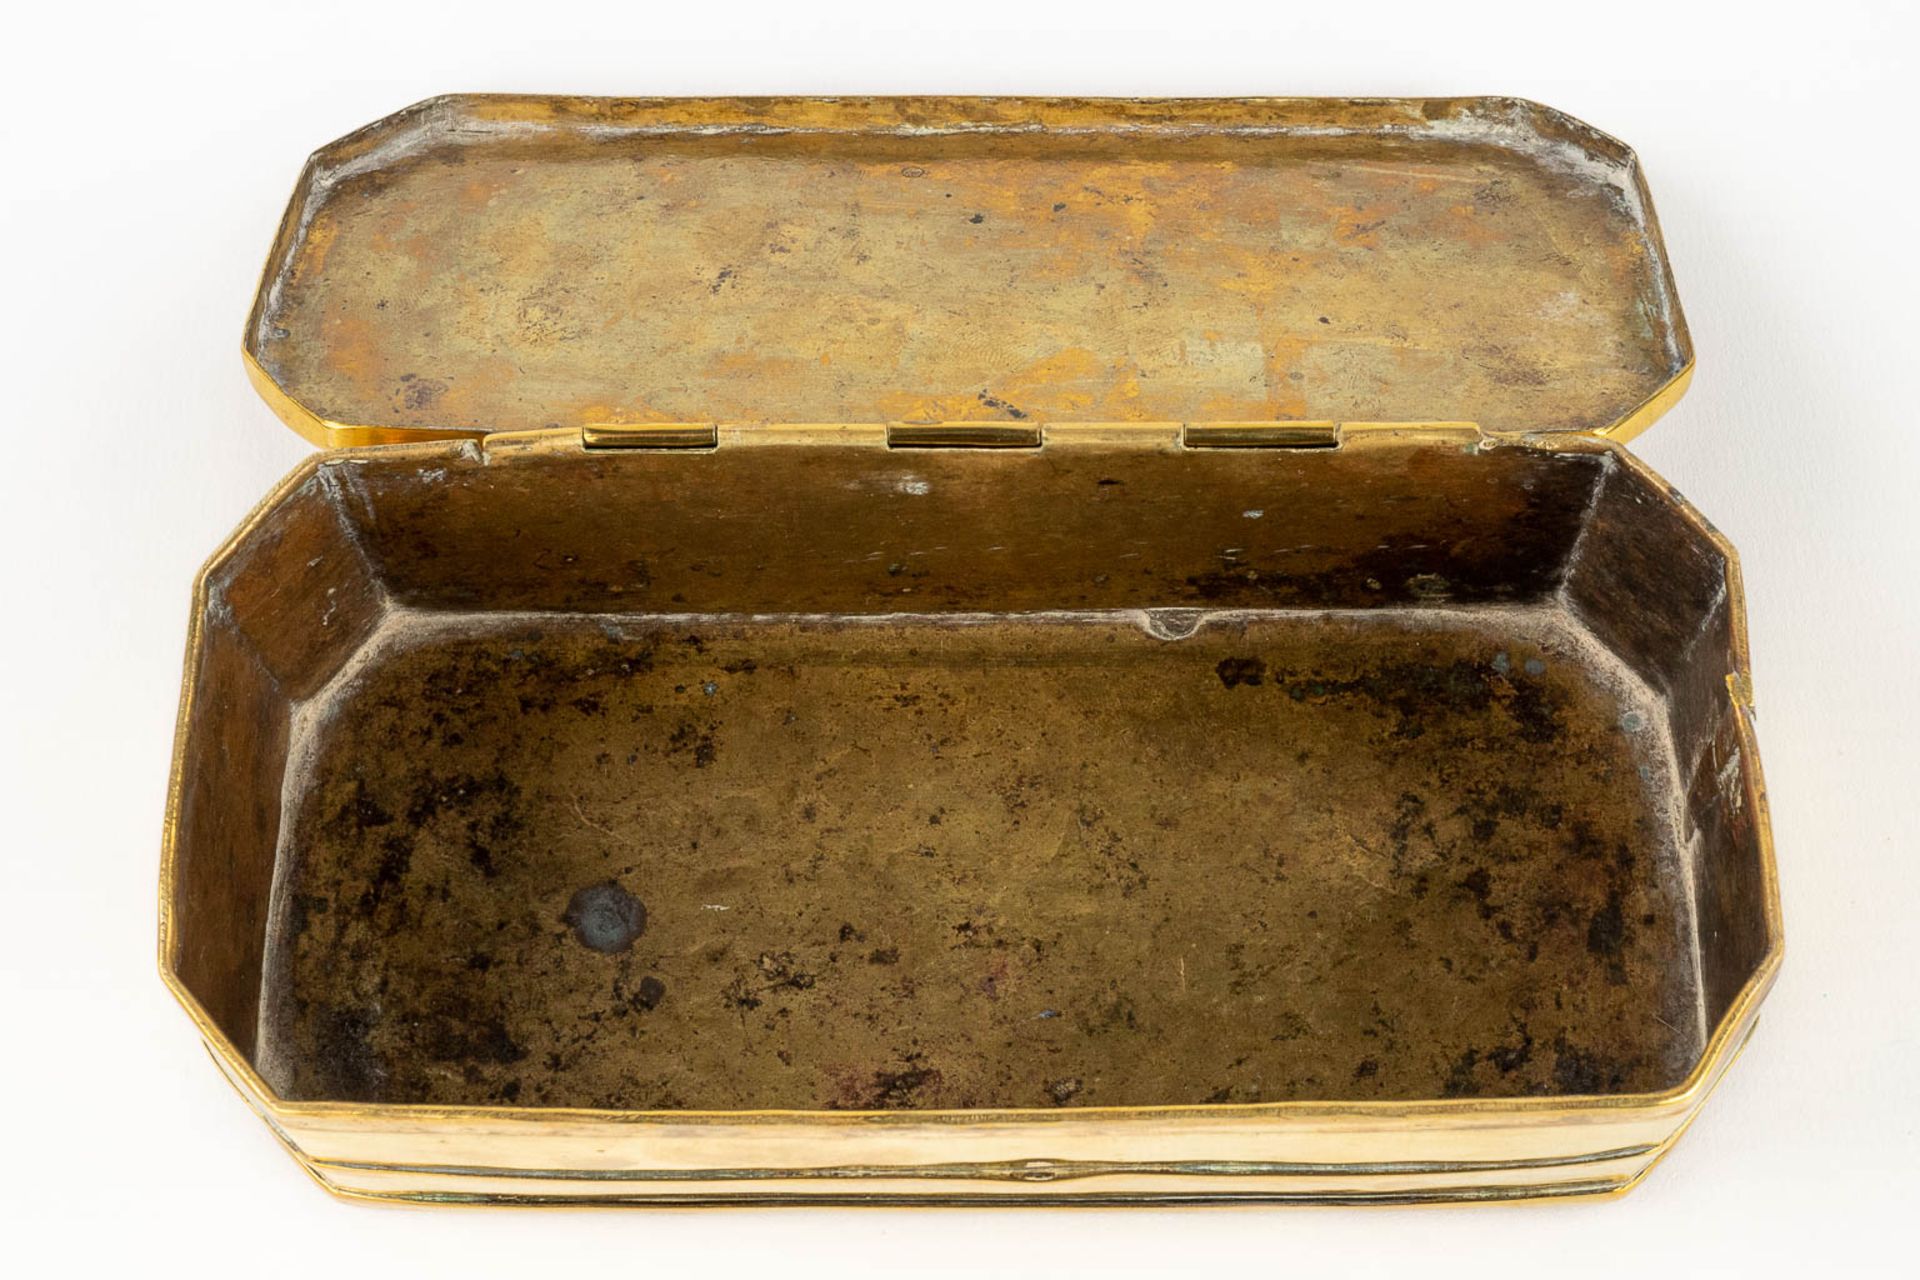 A collection of 3 antique oval tobacco boxes, made of copper. 18th/19th C. (L: 7 x W: 12 x H: 3,5 cm - Image 4 of 13